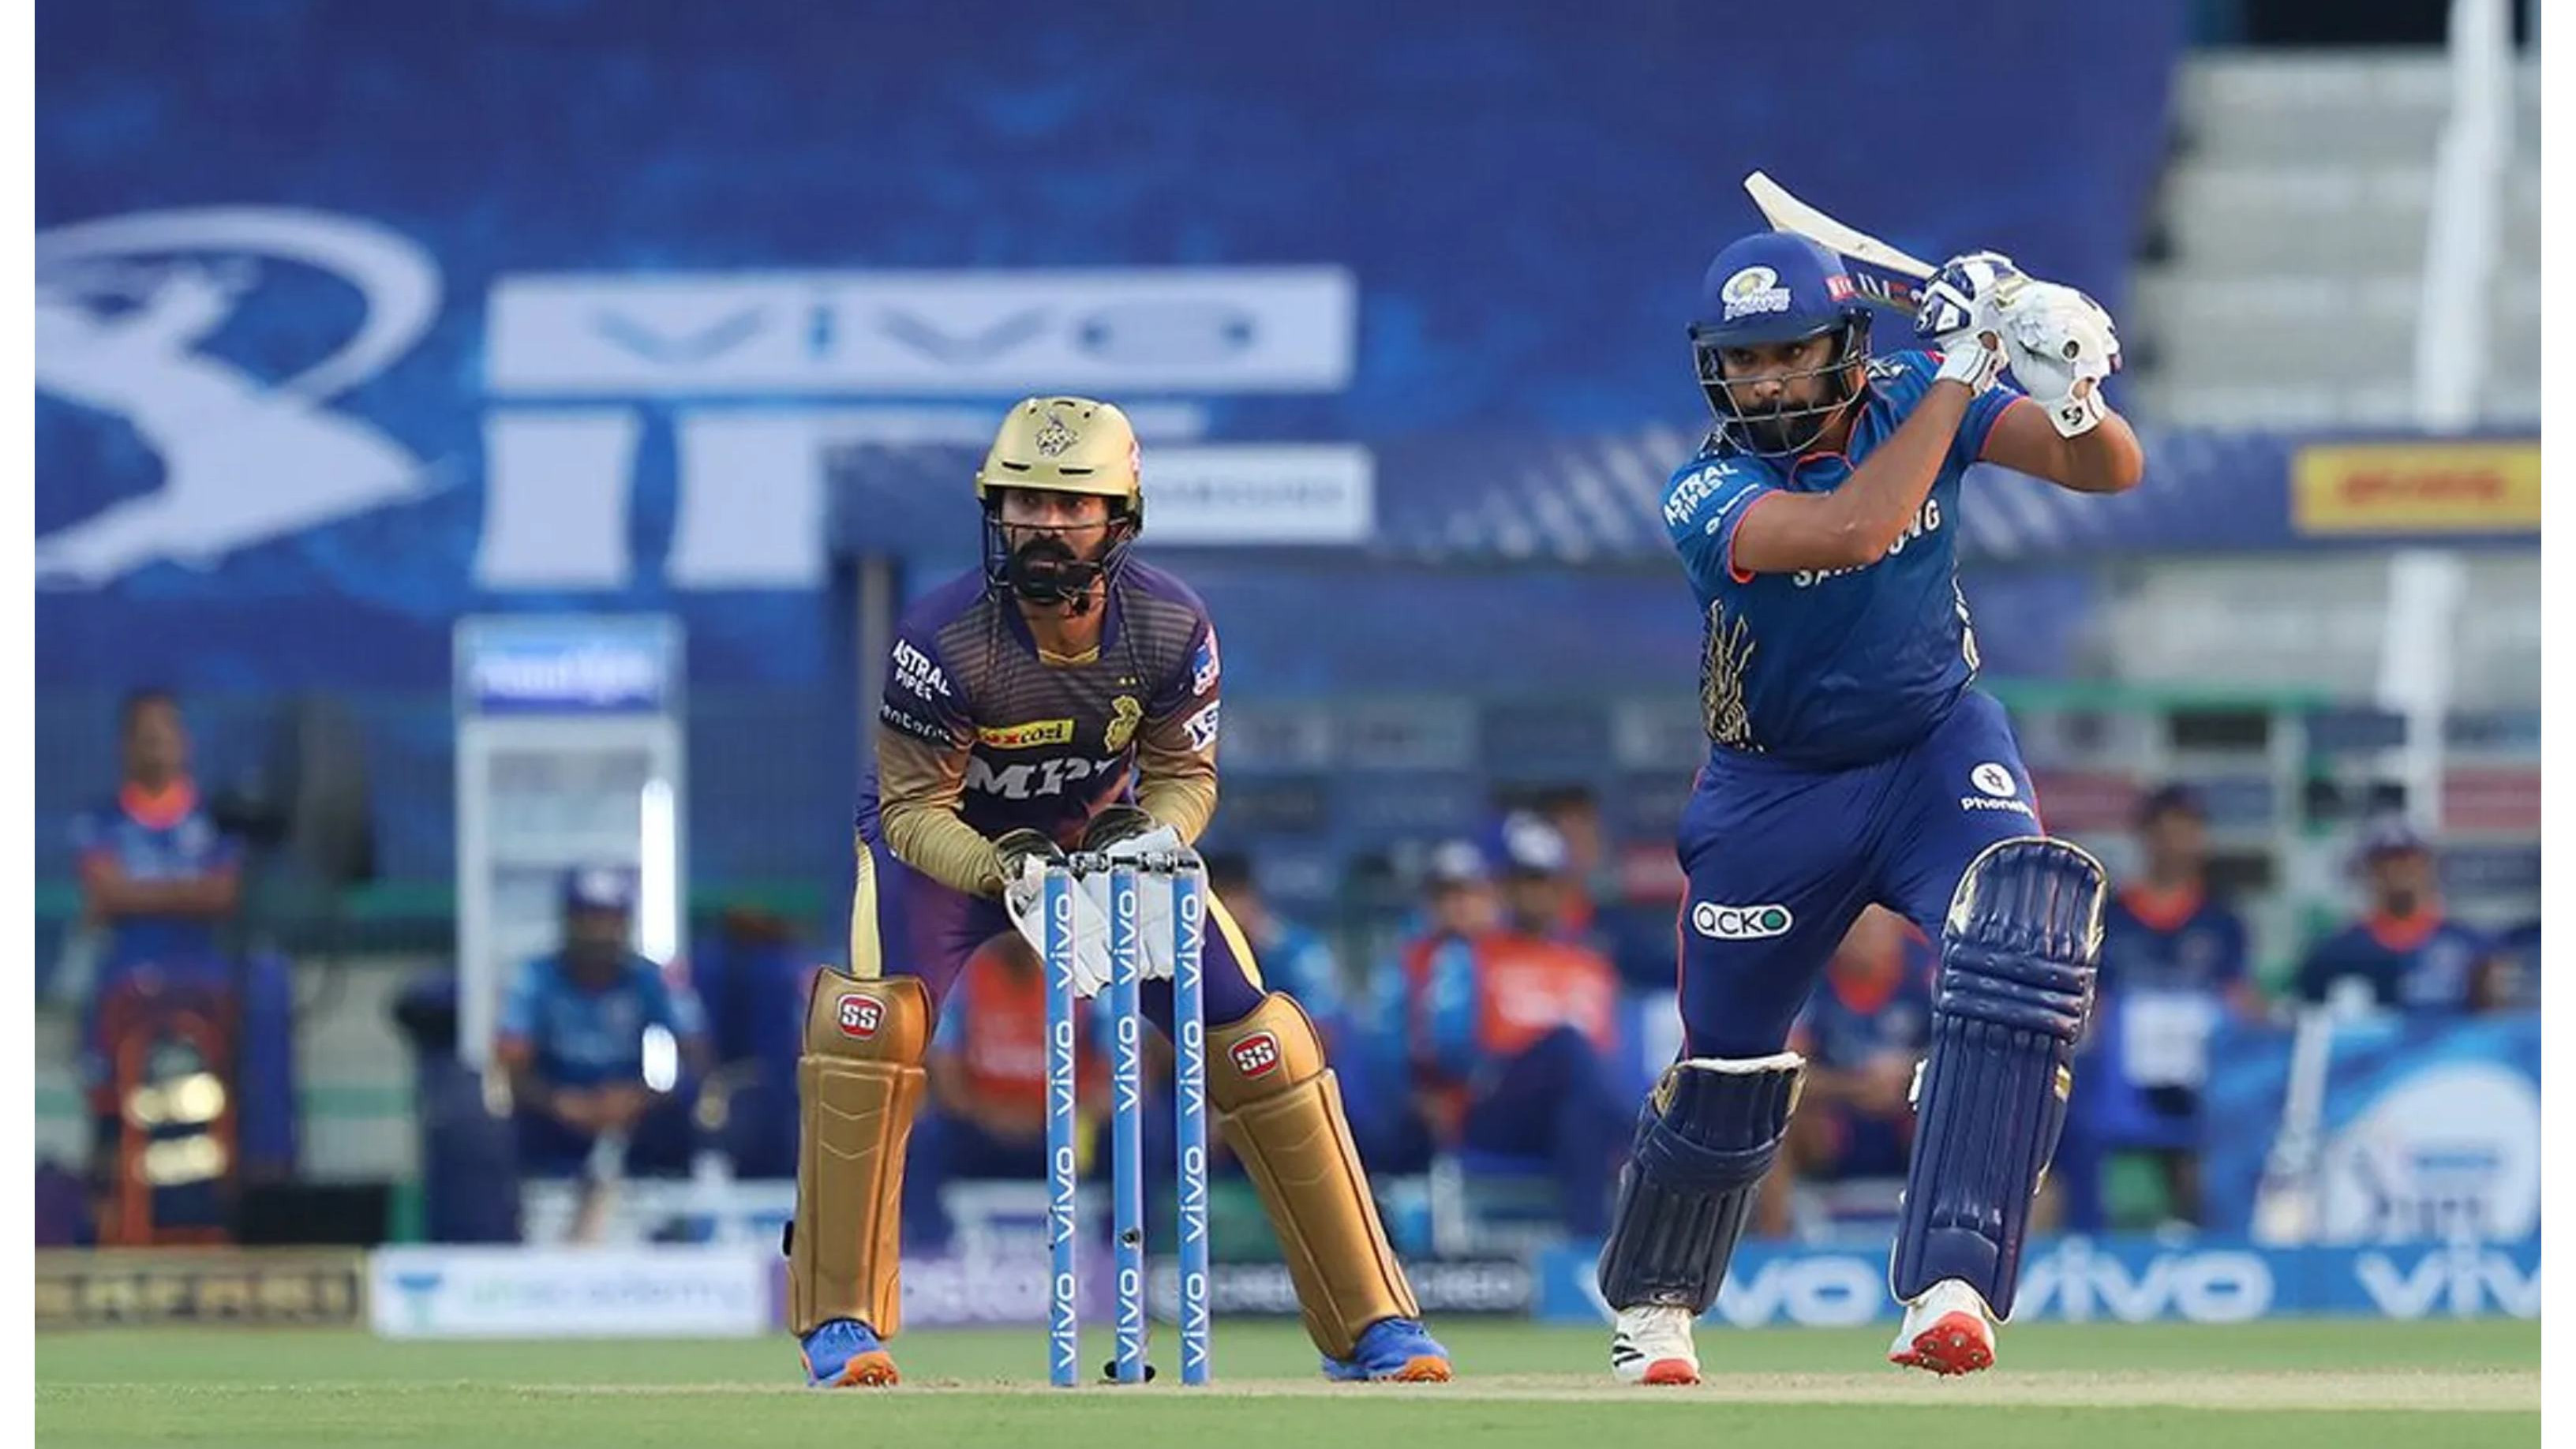 IPL 2021: “It was a good pitch, we failed to capitalise on start”, Rohit Sharma after MI’s big loss to KKR